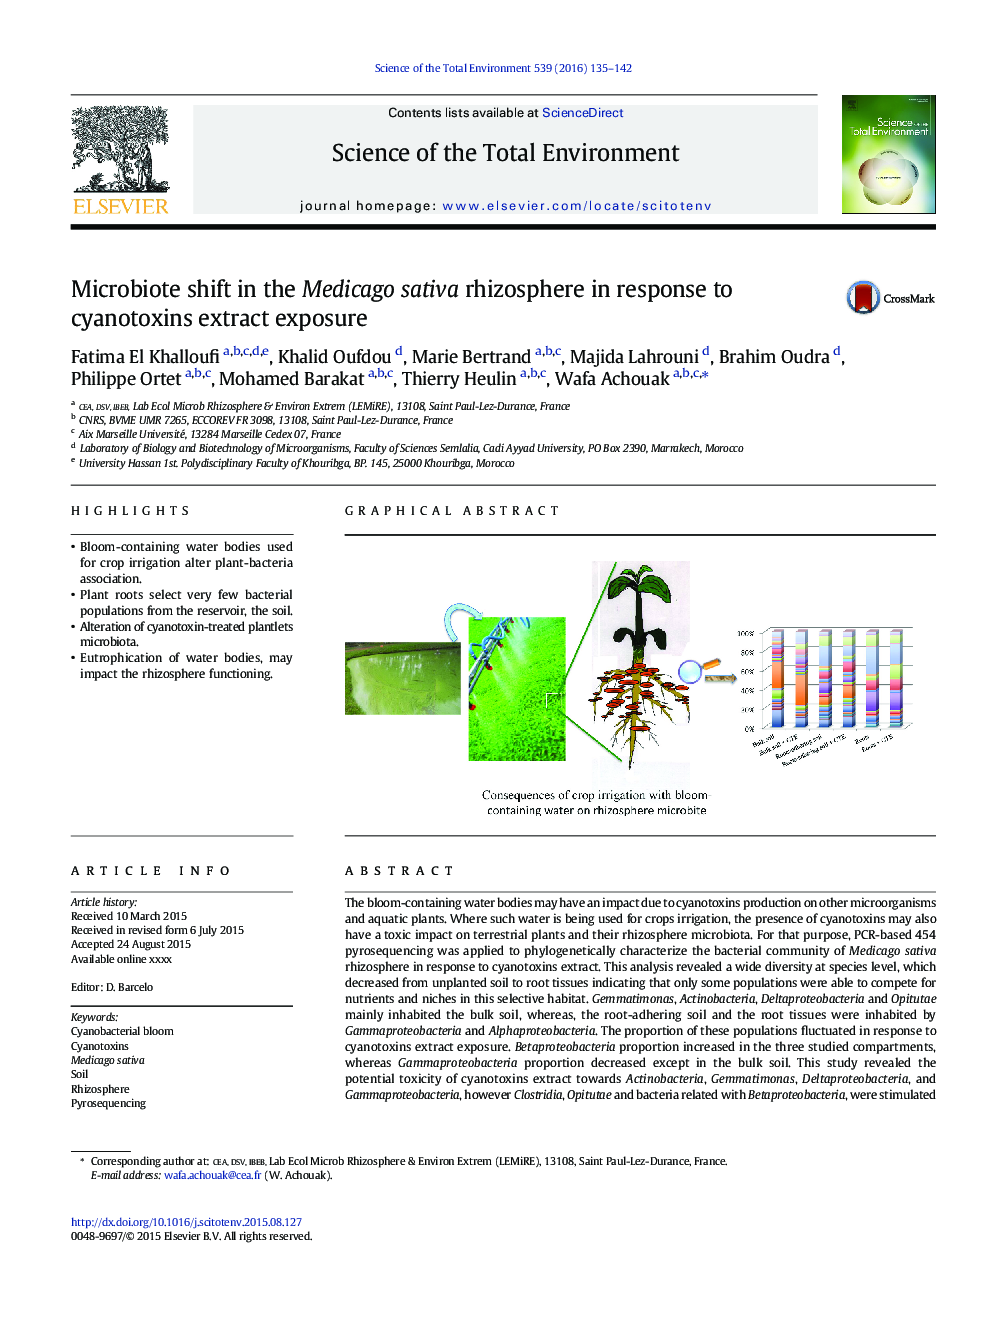 Microbiote shift in the Medicago sativa rhizosphere in response to cyanotoxins extract exposure